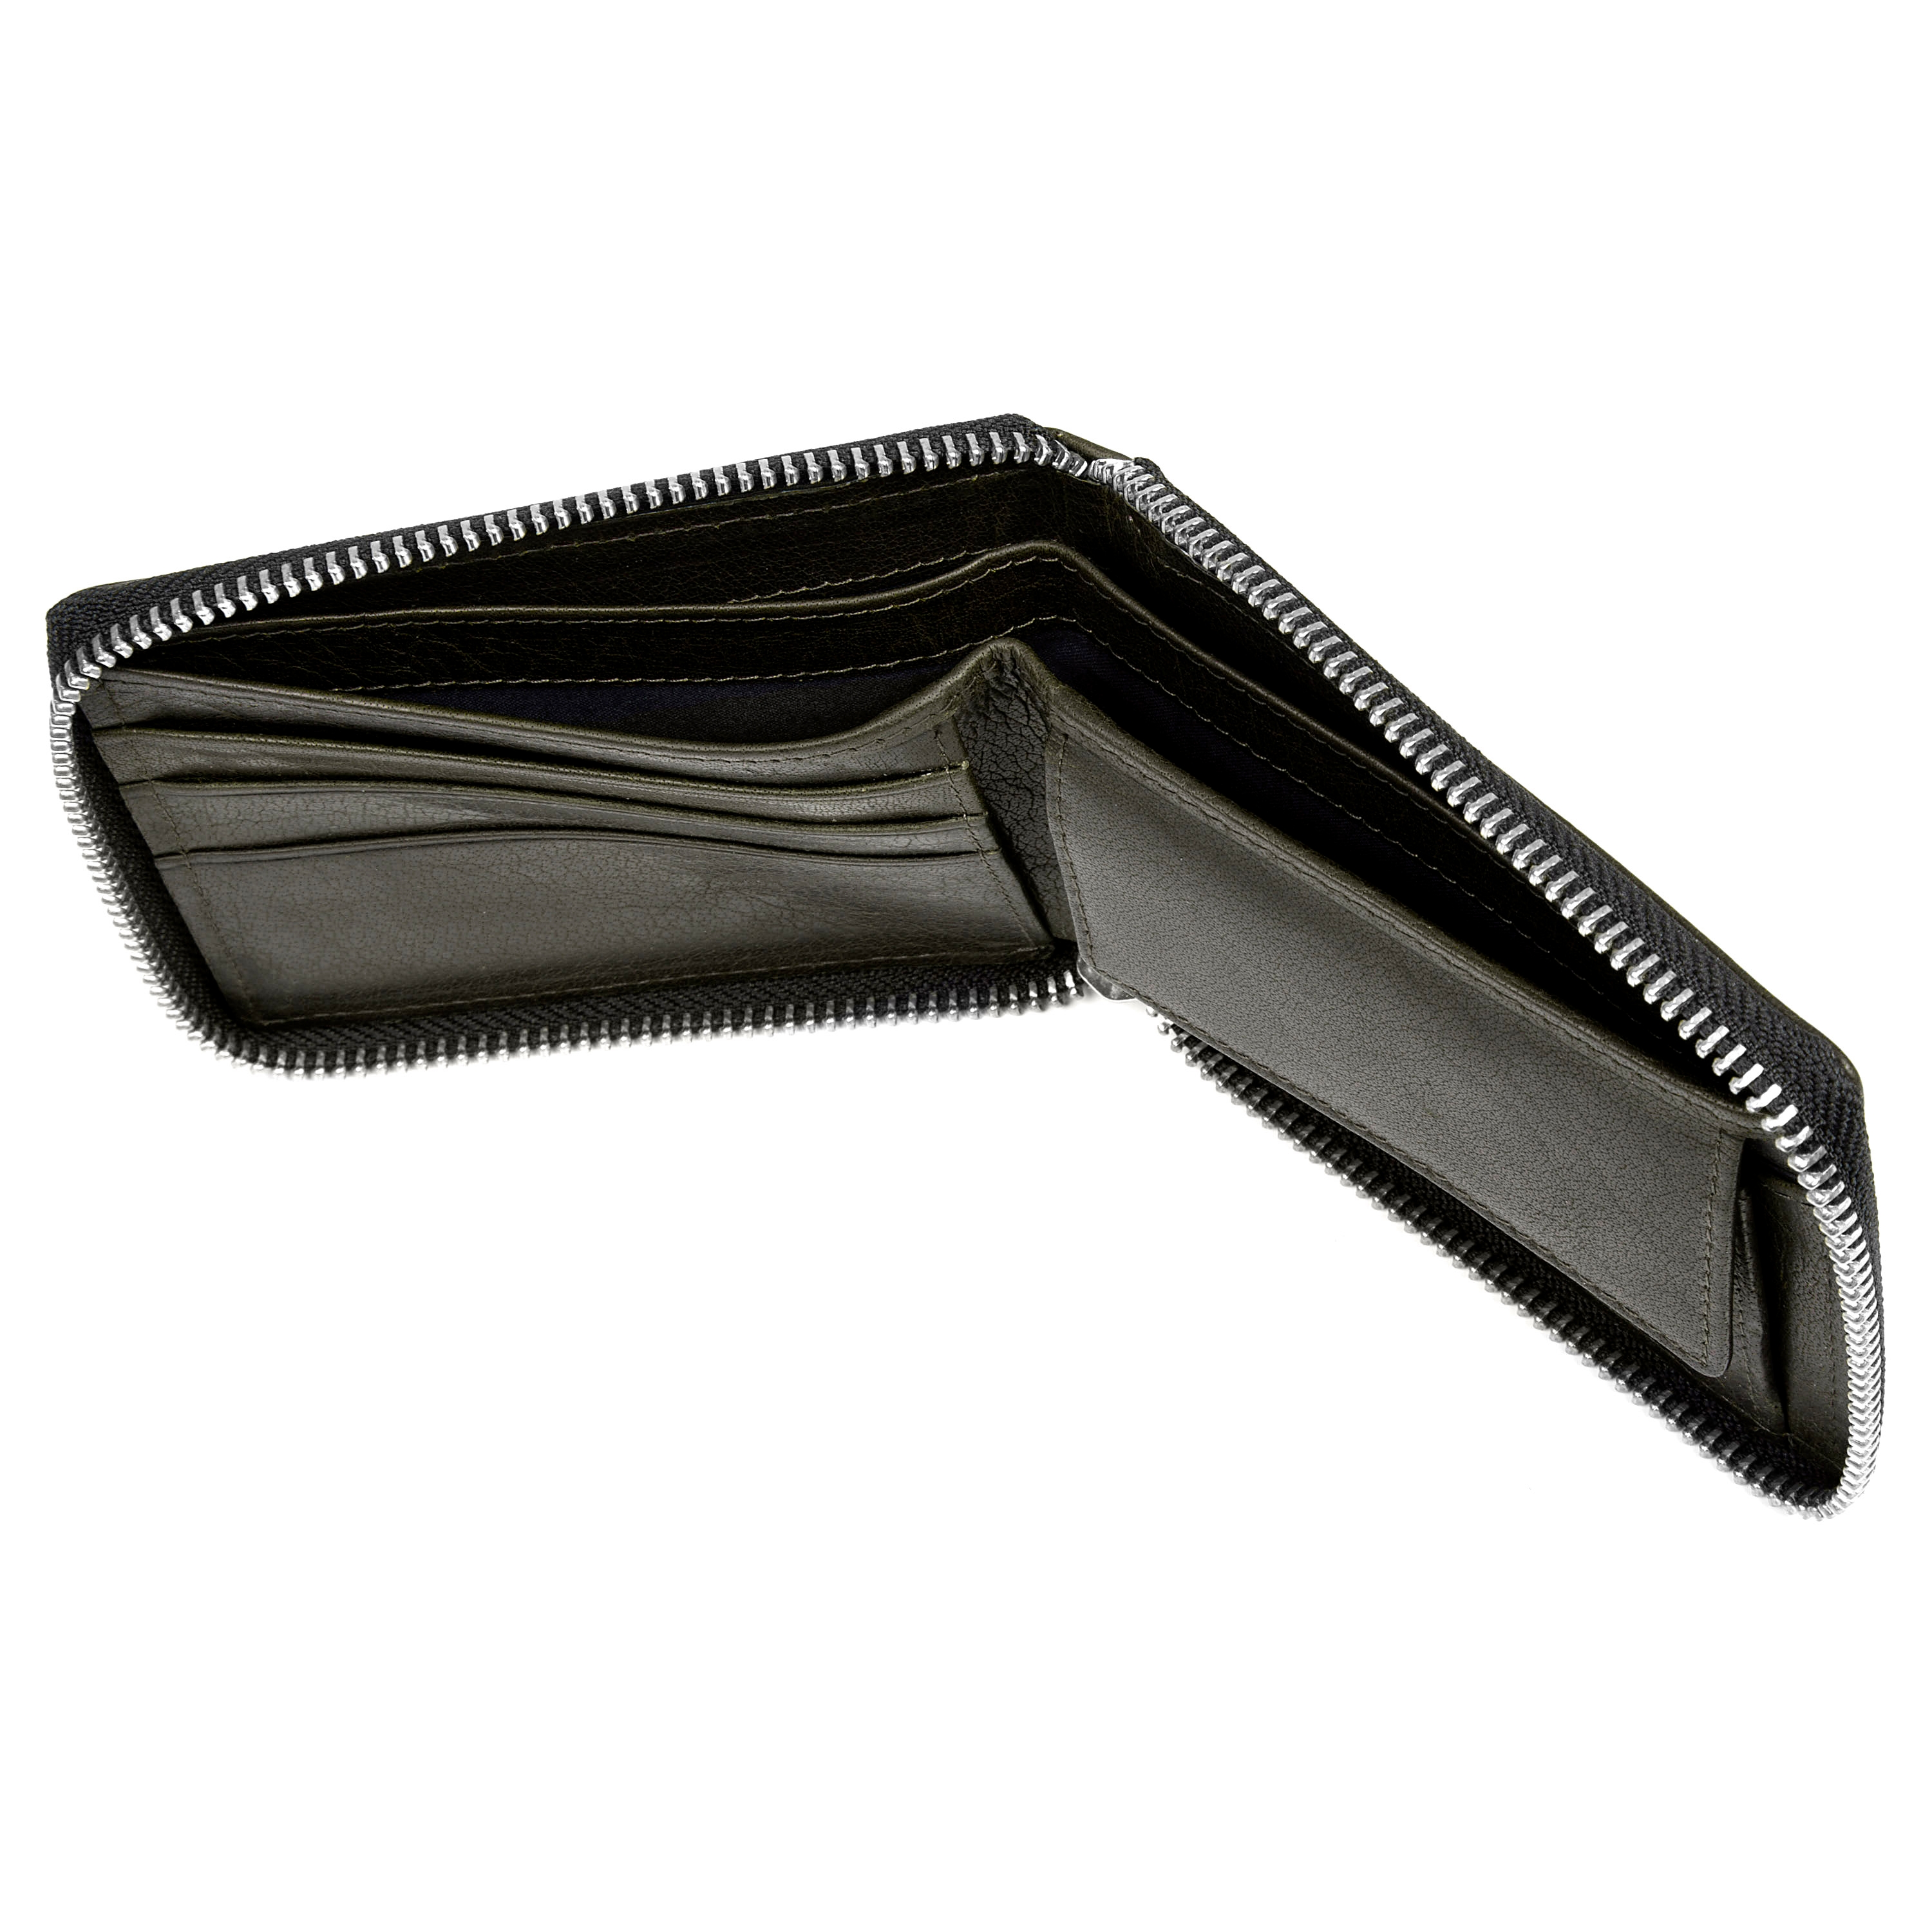 How to Choose the Right Men's Wallet – 5 Quick Tips